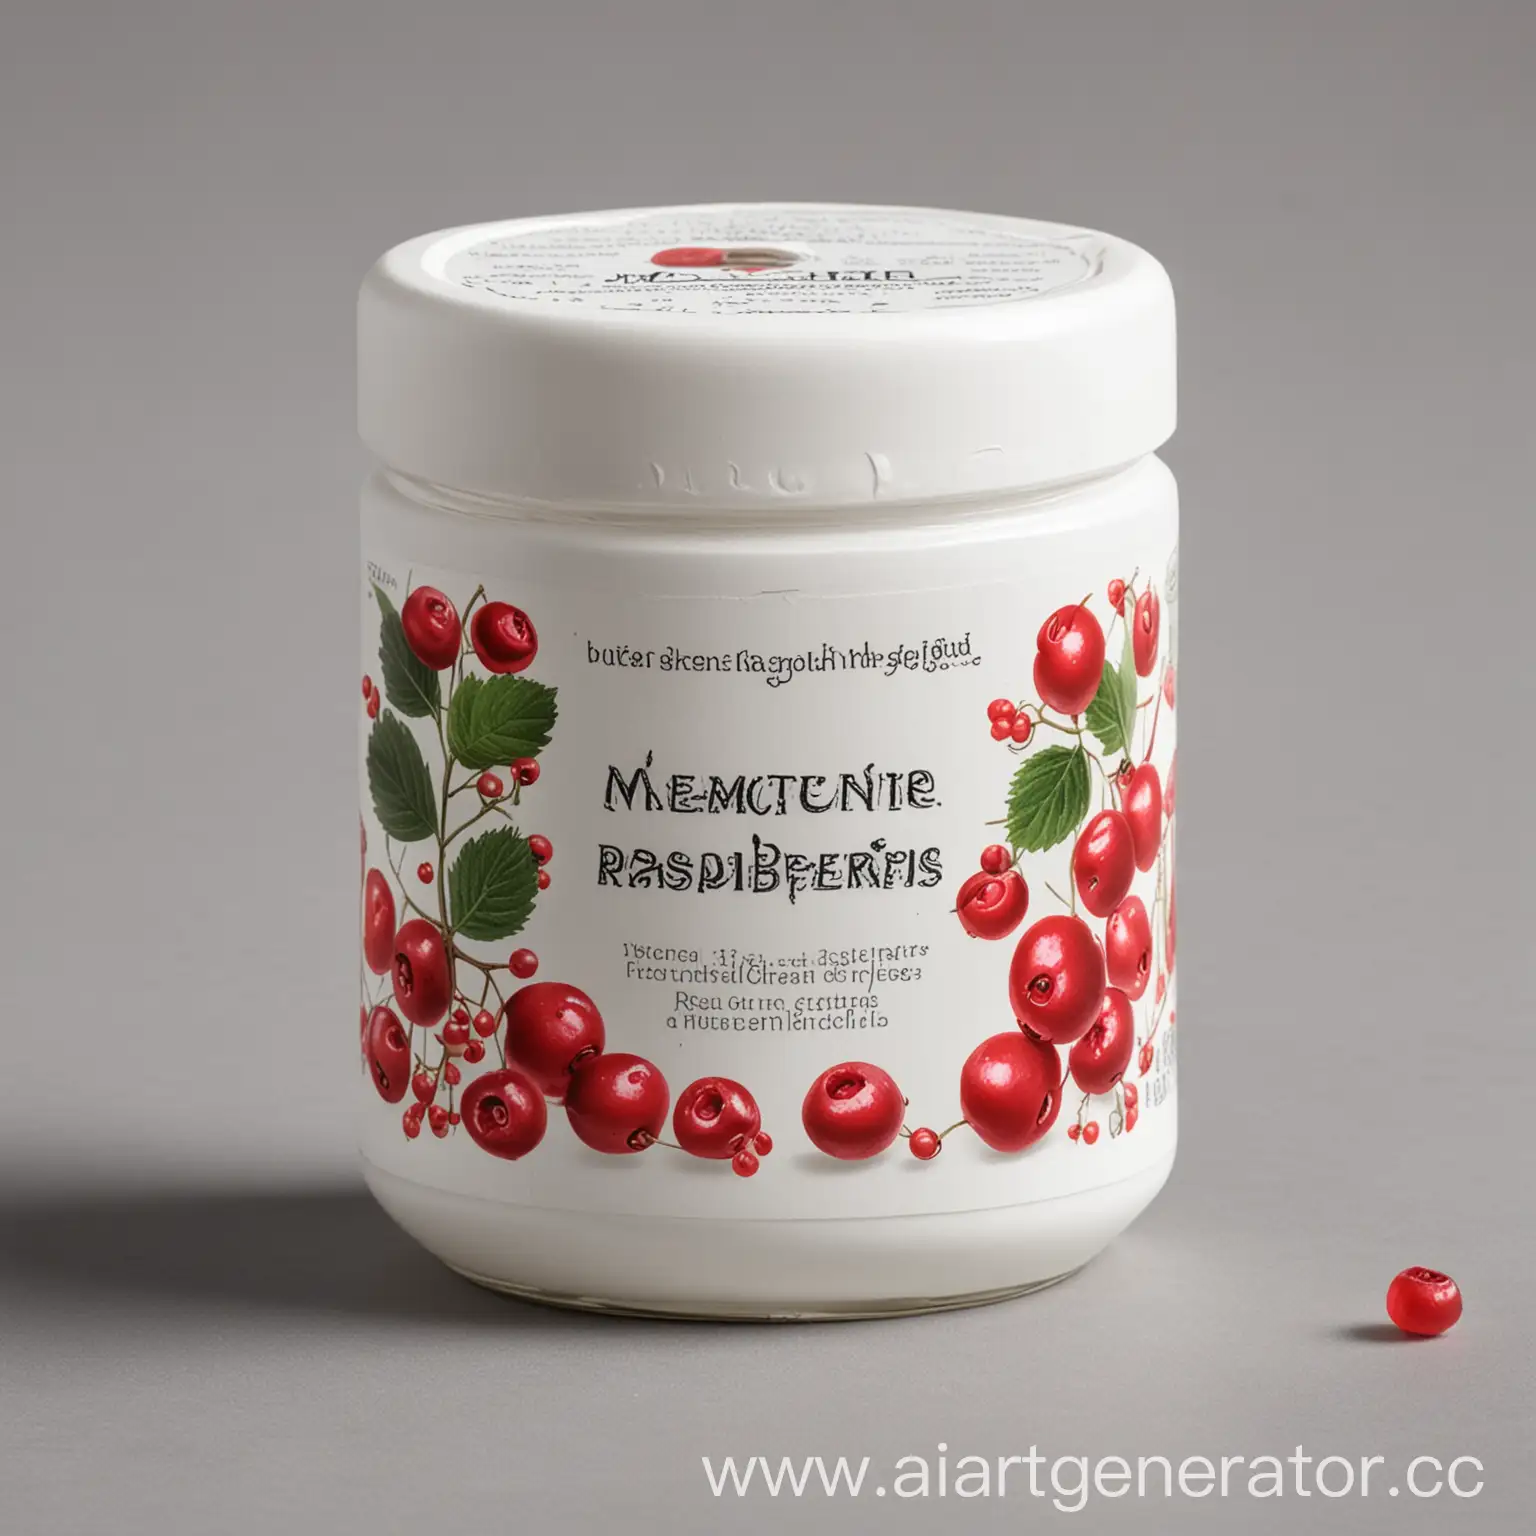 Opaque-White-Medicine-Jar-with-Berries-Illustration